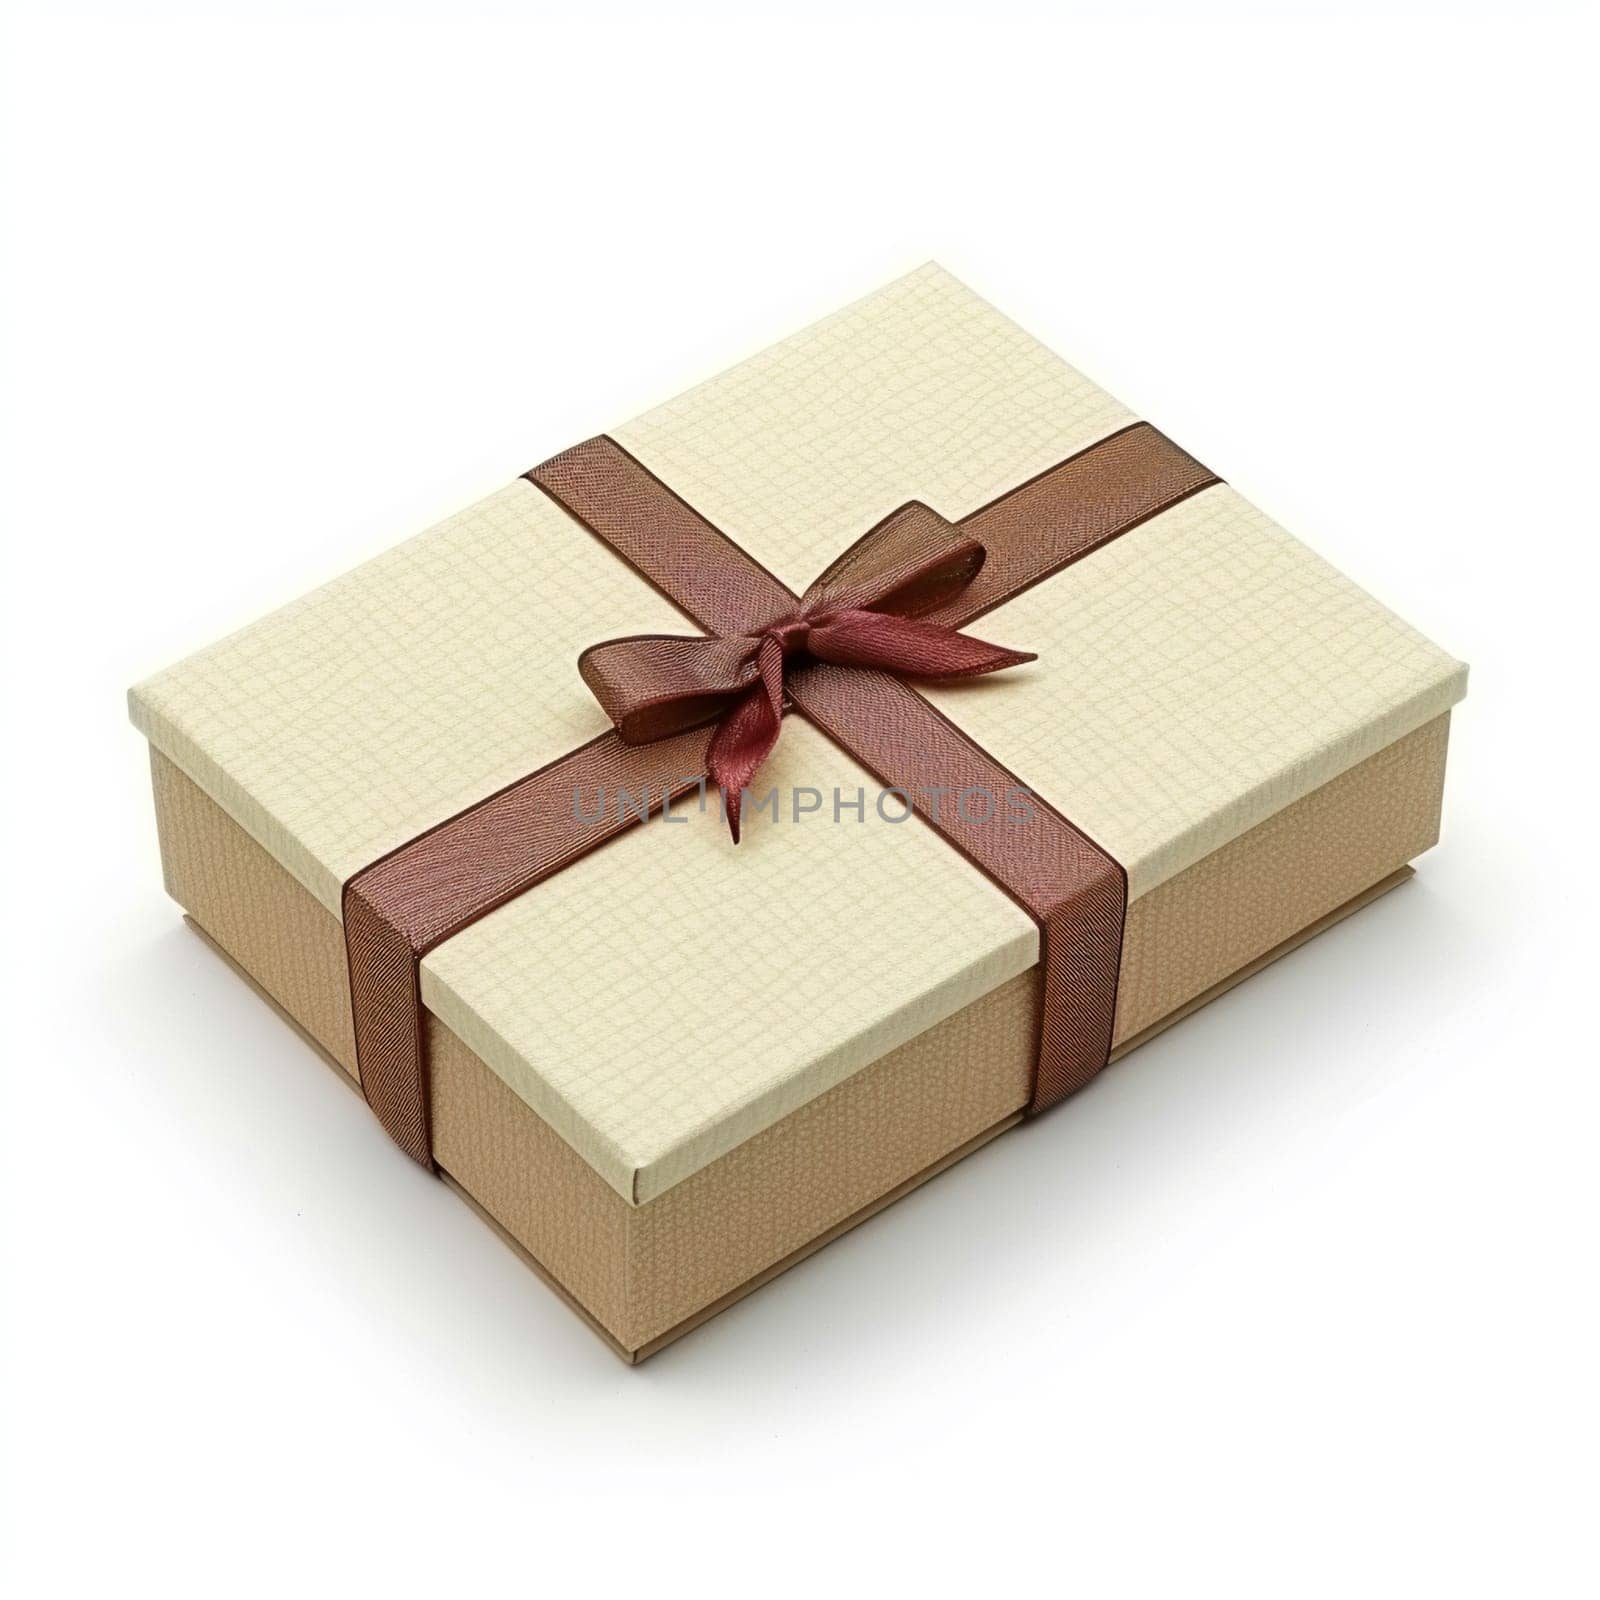 High-quality image of an elegant beige gift box with brown ribbon, perfect for occasions, isolated on white.